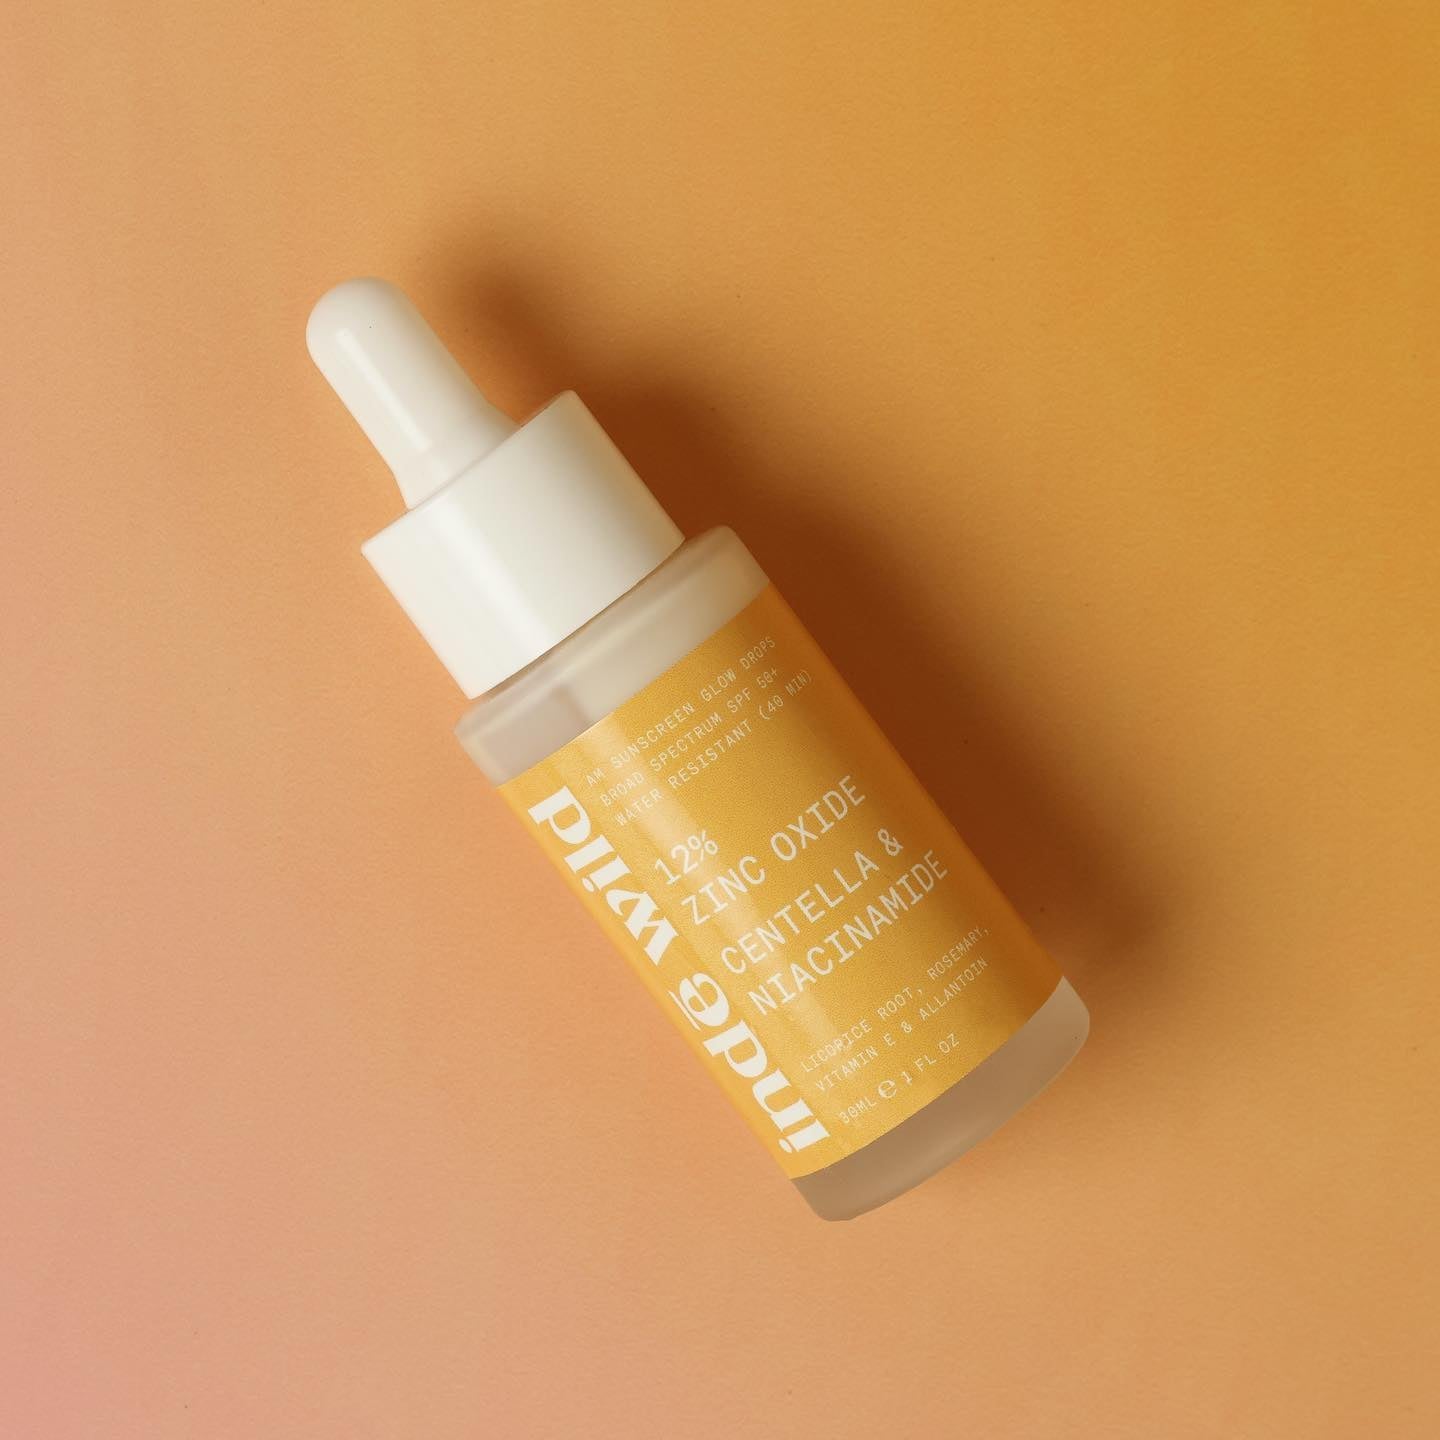 The What, When, Why of SPF! - indē wild US